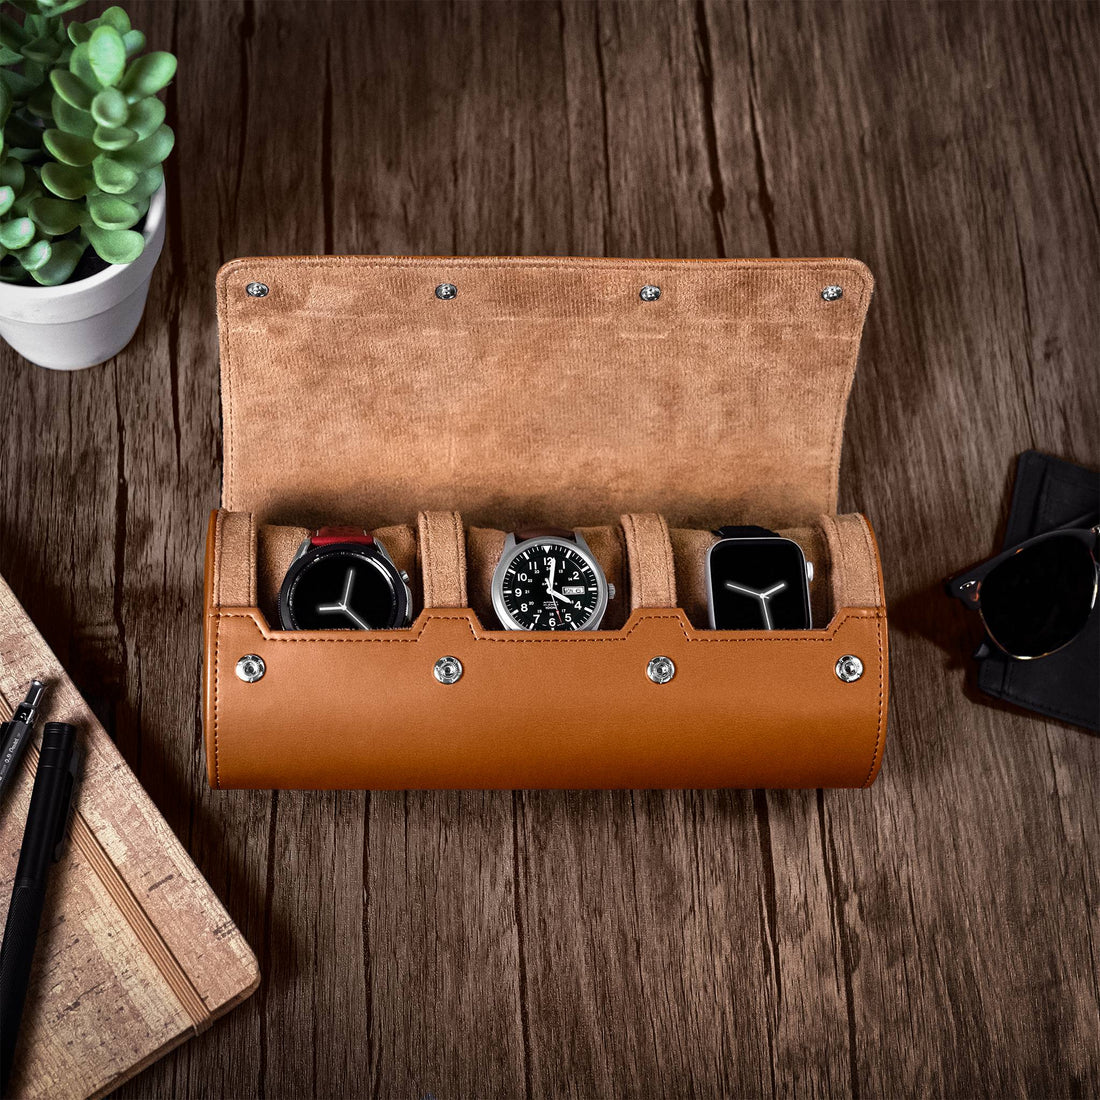 Introducing our Leather Watch Roll